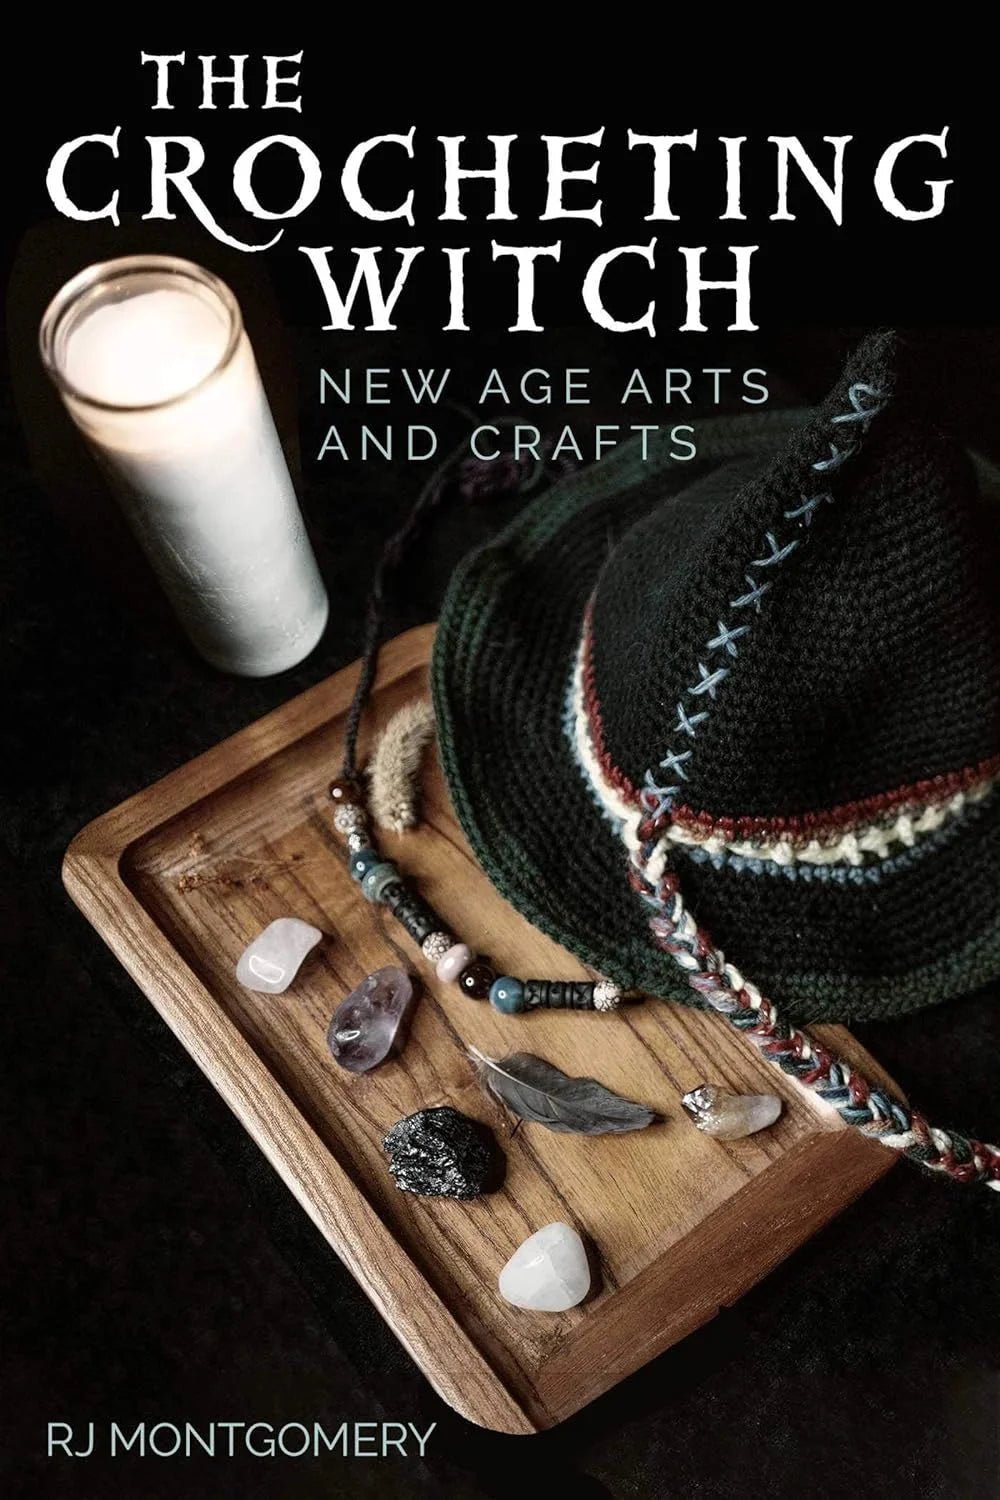 The Crocheting Witch: New Age Arts and Crafts - RJ Montgomery - The Little Yarn Store